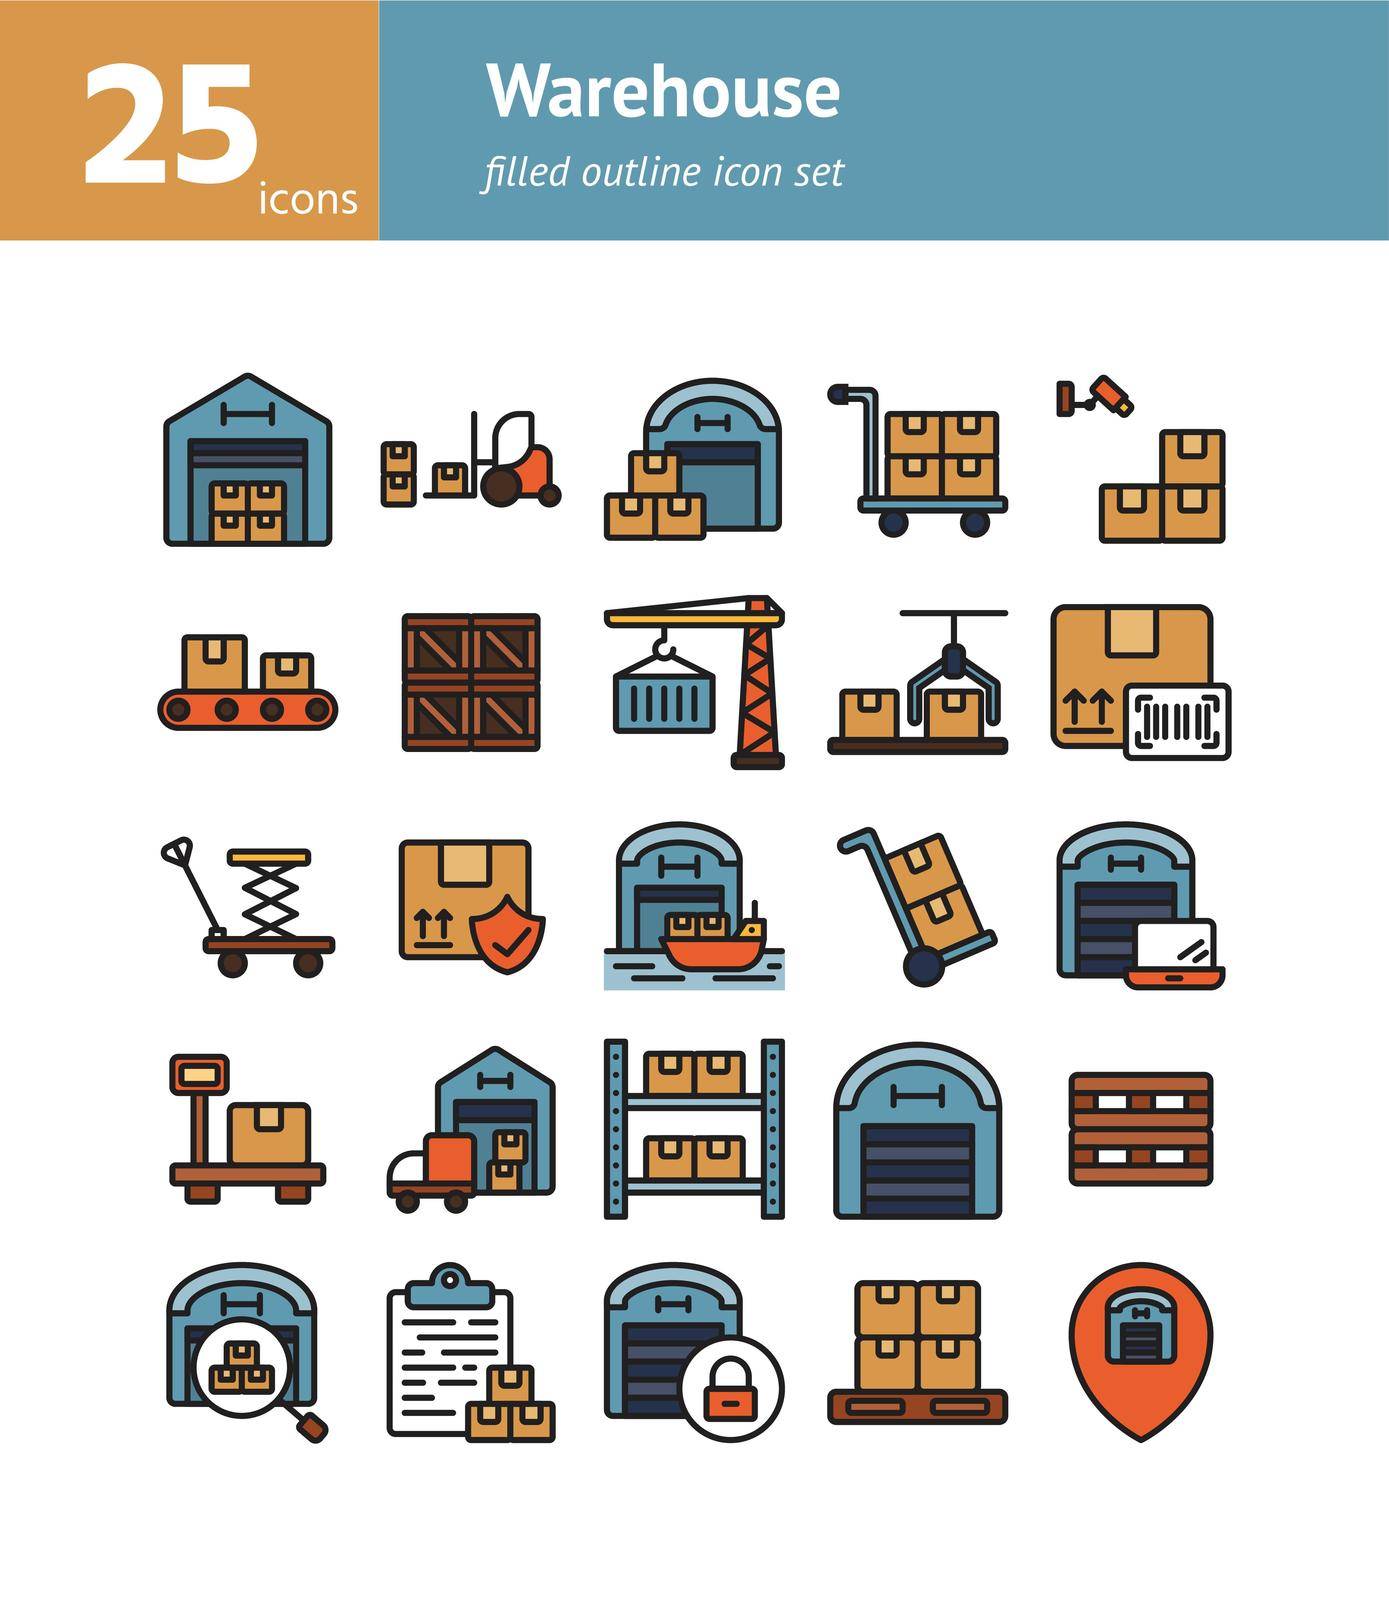 Warehouse filled outline icon set. Vector and Illustration.